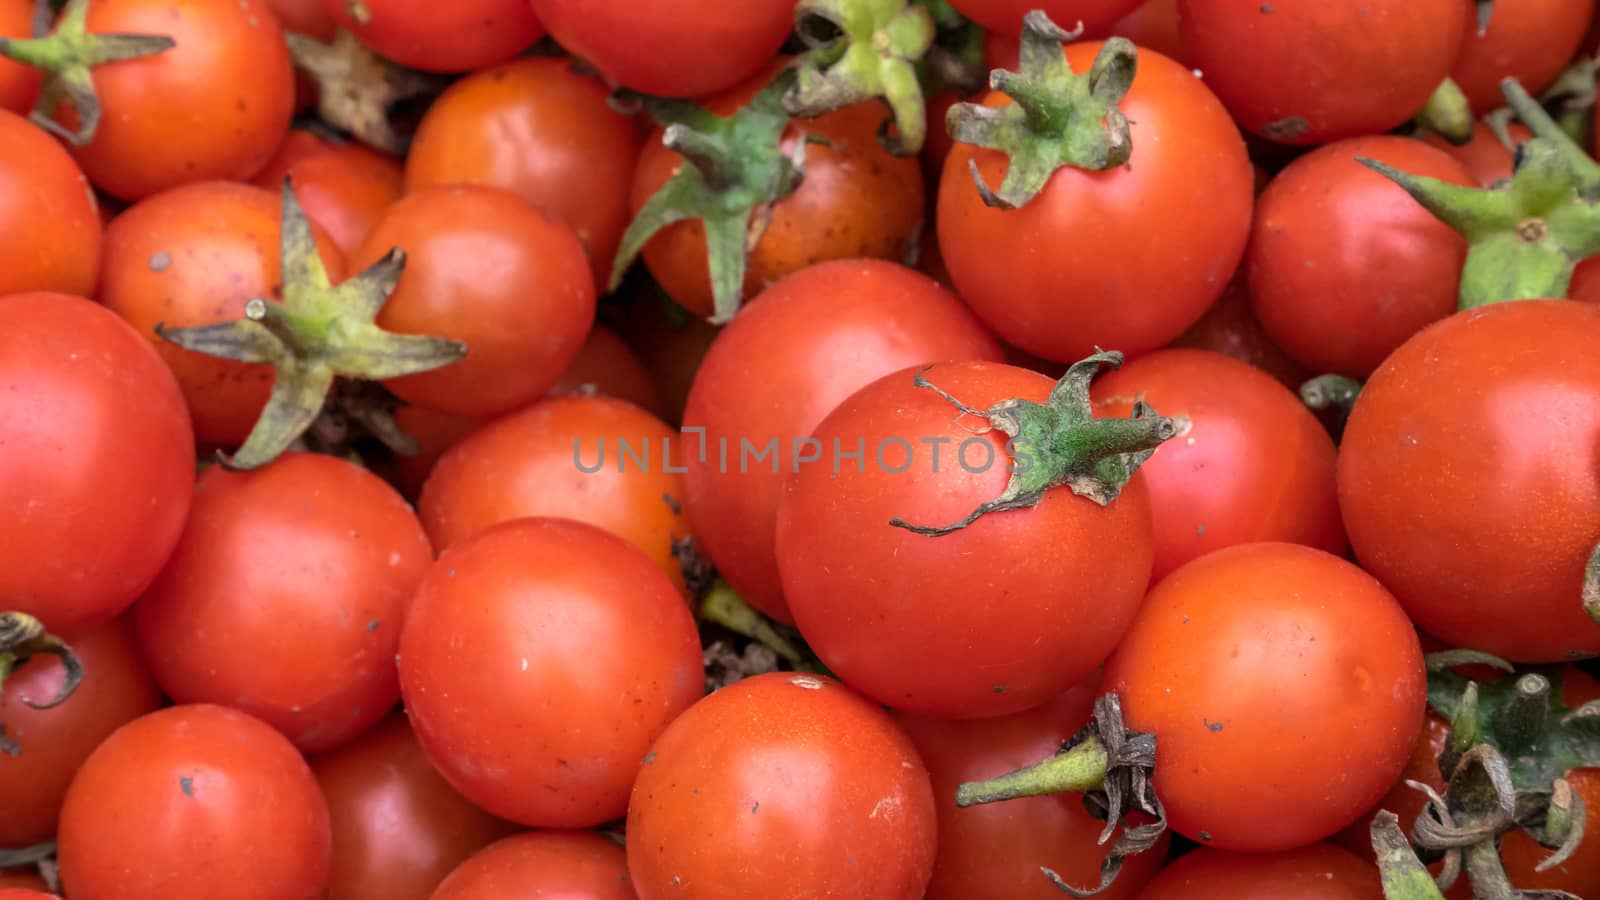 The close up of fresh tomatoes vegetable at street food market in Taipei, Taiwan.